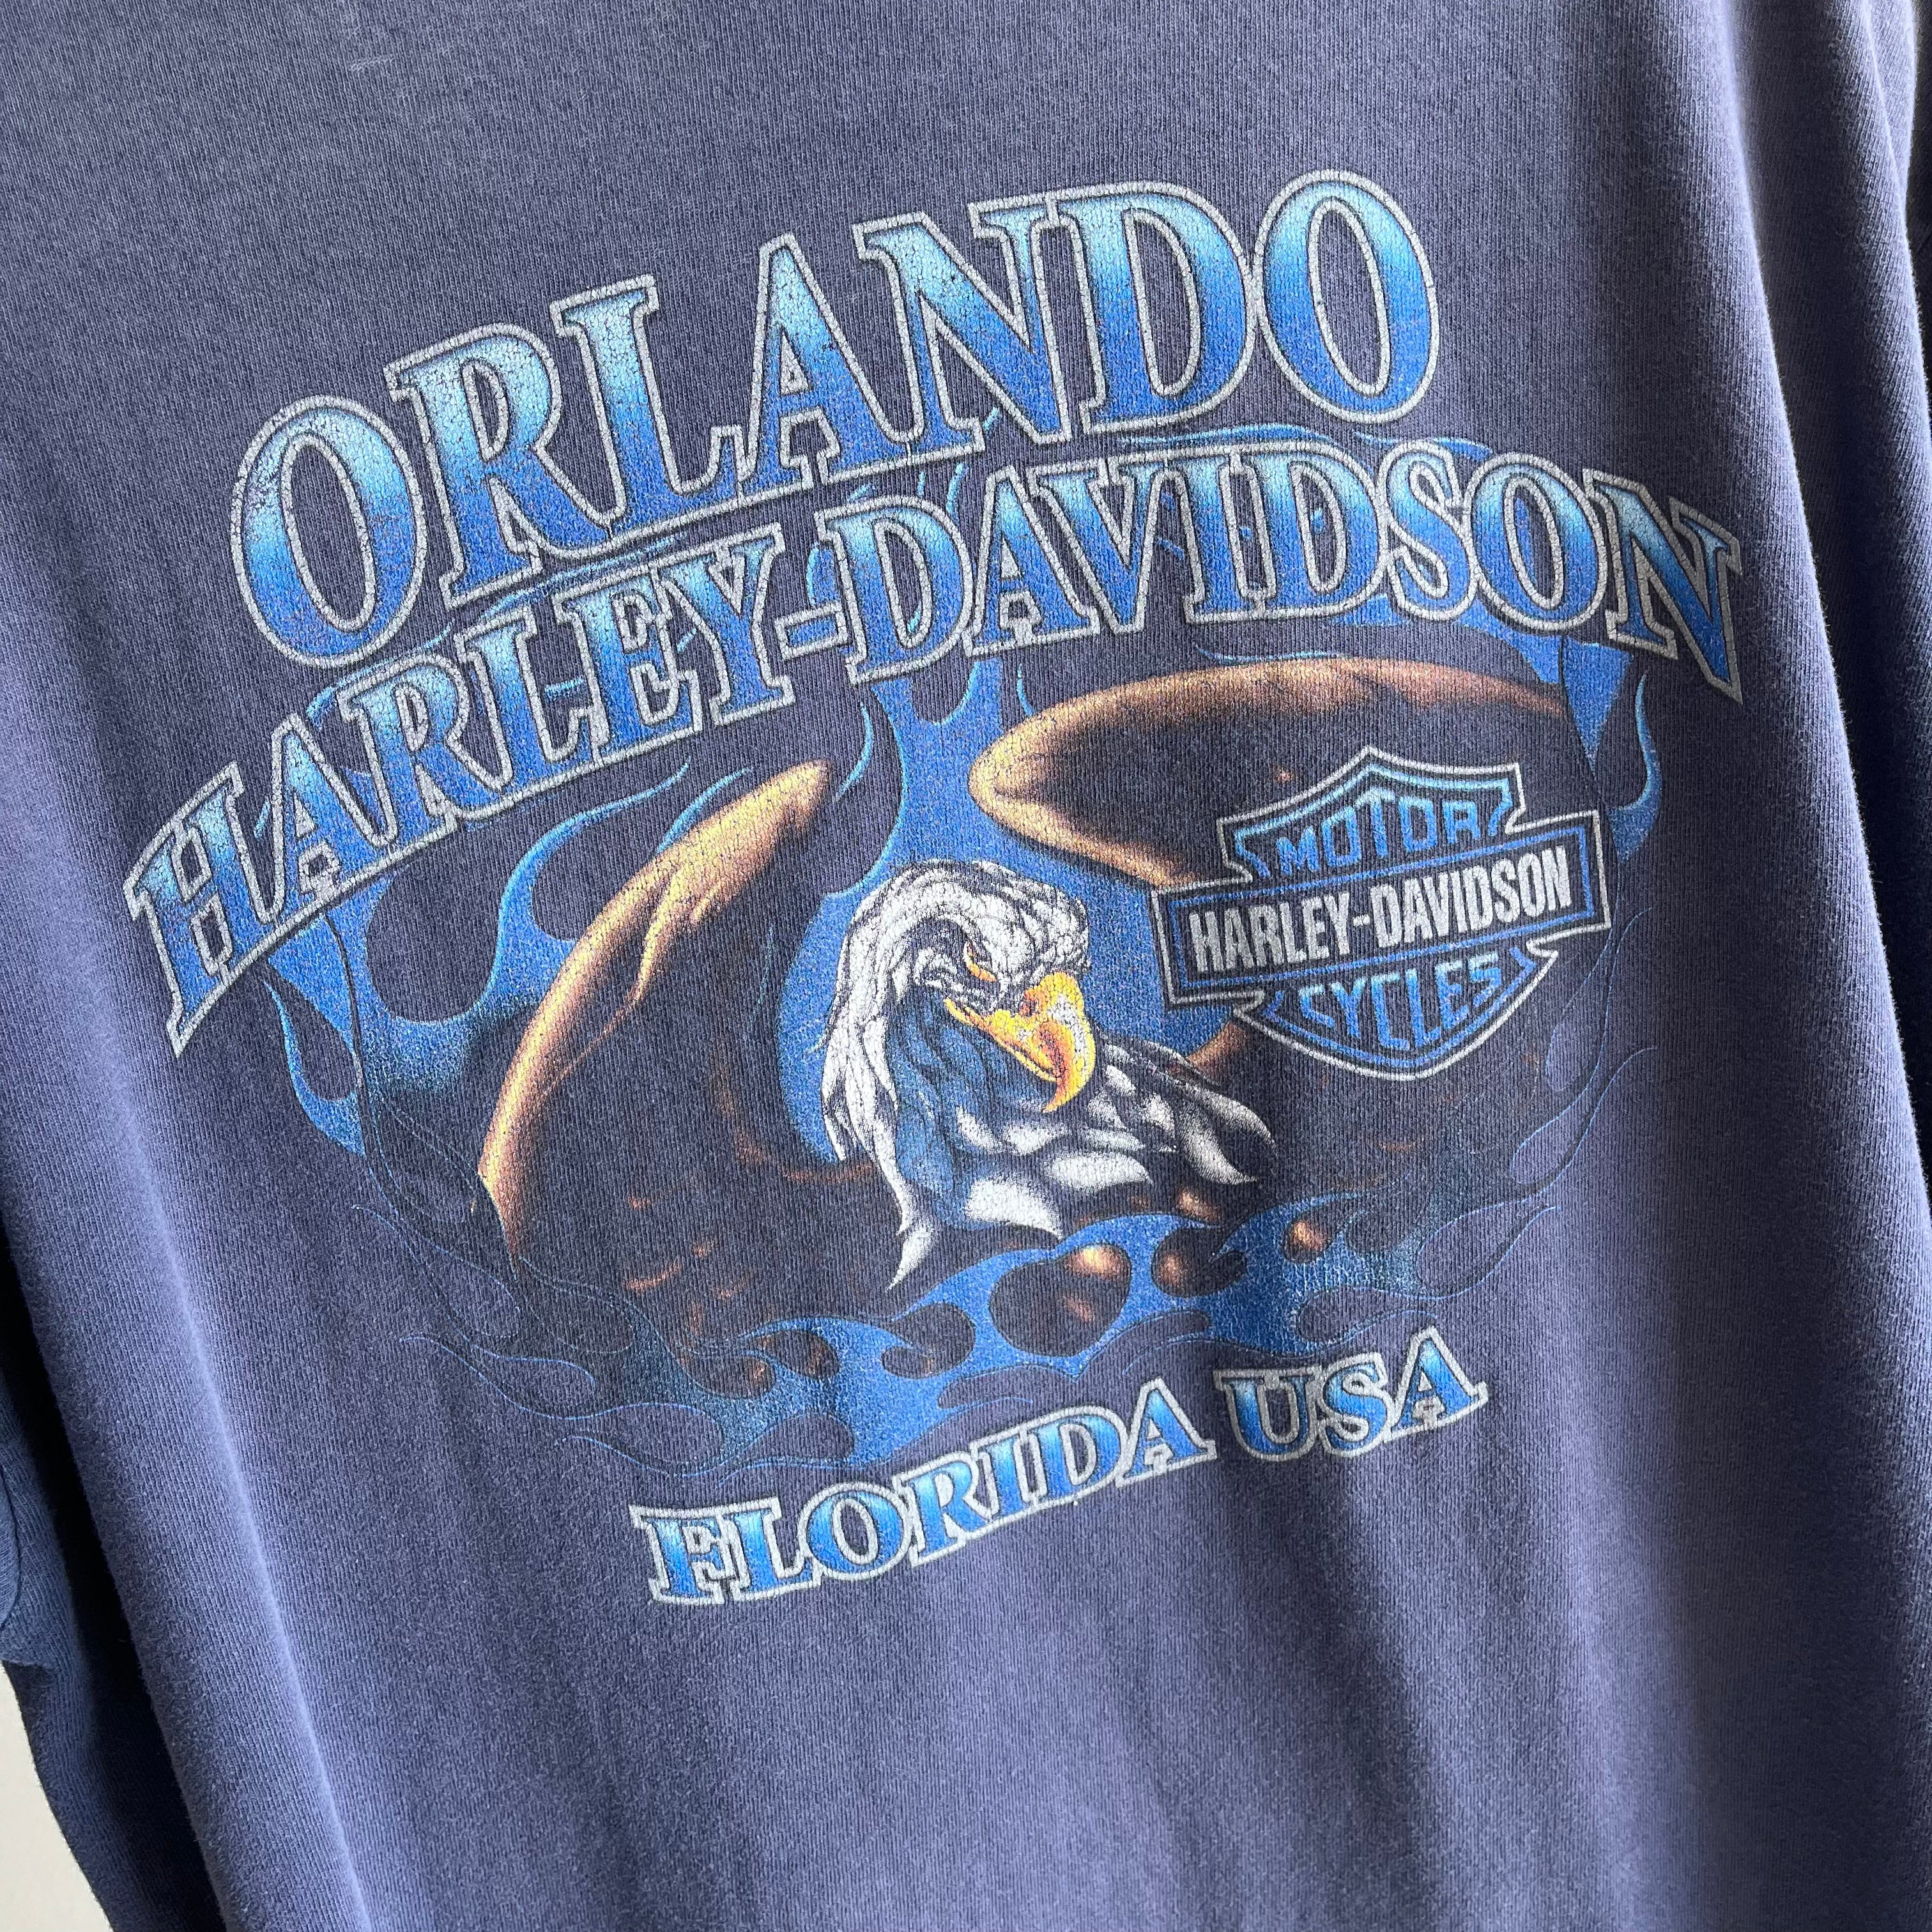 2006 Harley, Orlando FL, Beat Up and Sun Faded Cotton T-Shirt